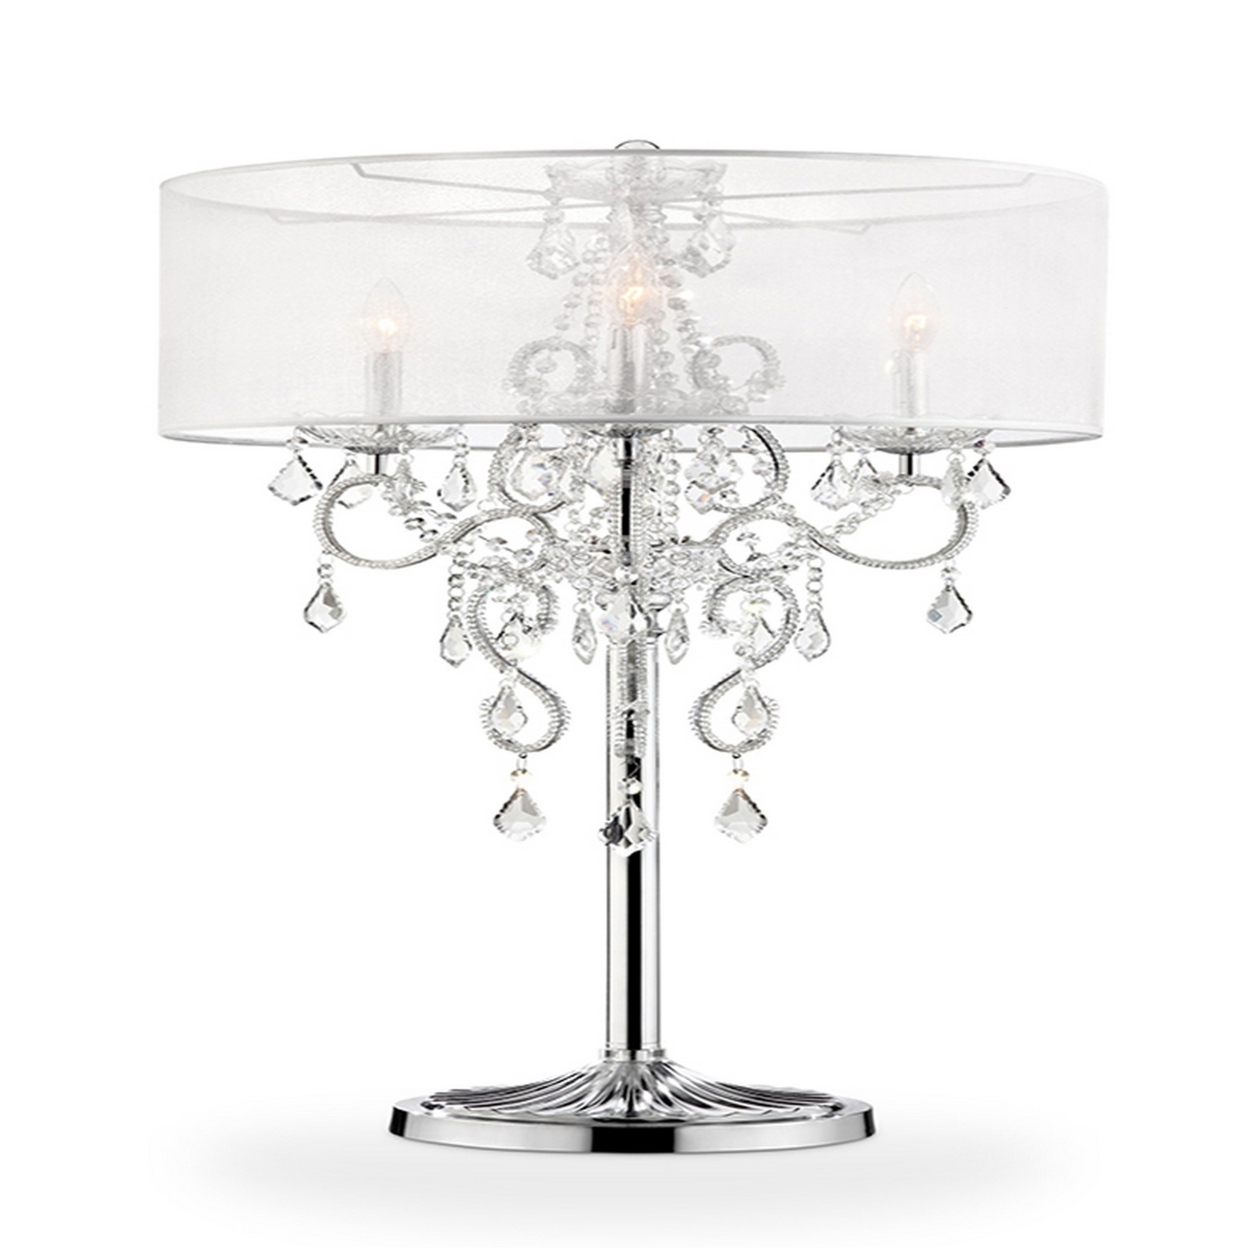 Table Lamp With Metal Base And Hanging Crystals, Silver- Saltoro Sherpi